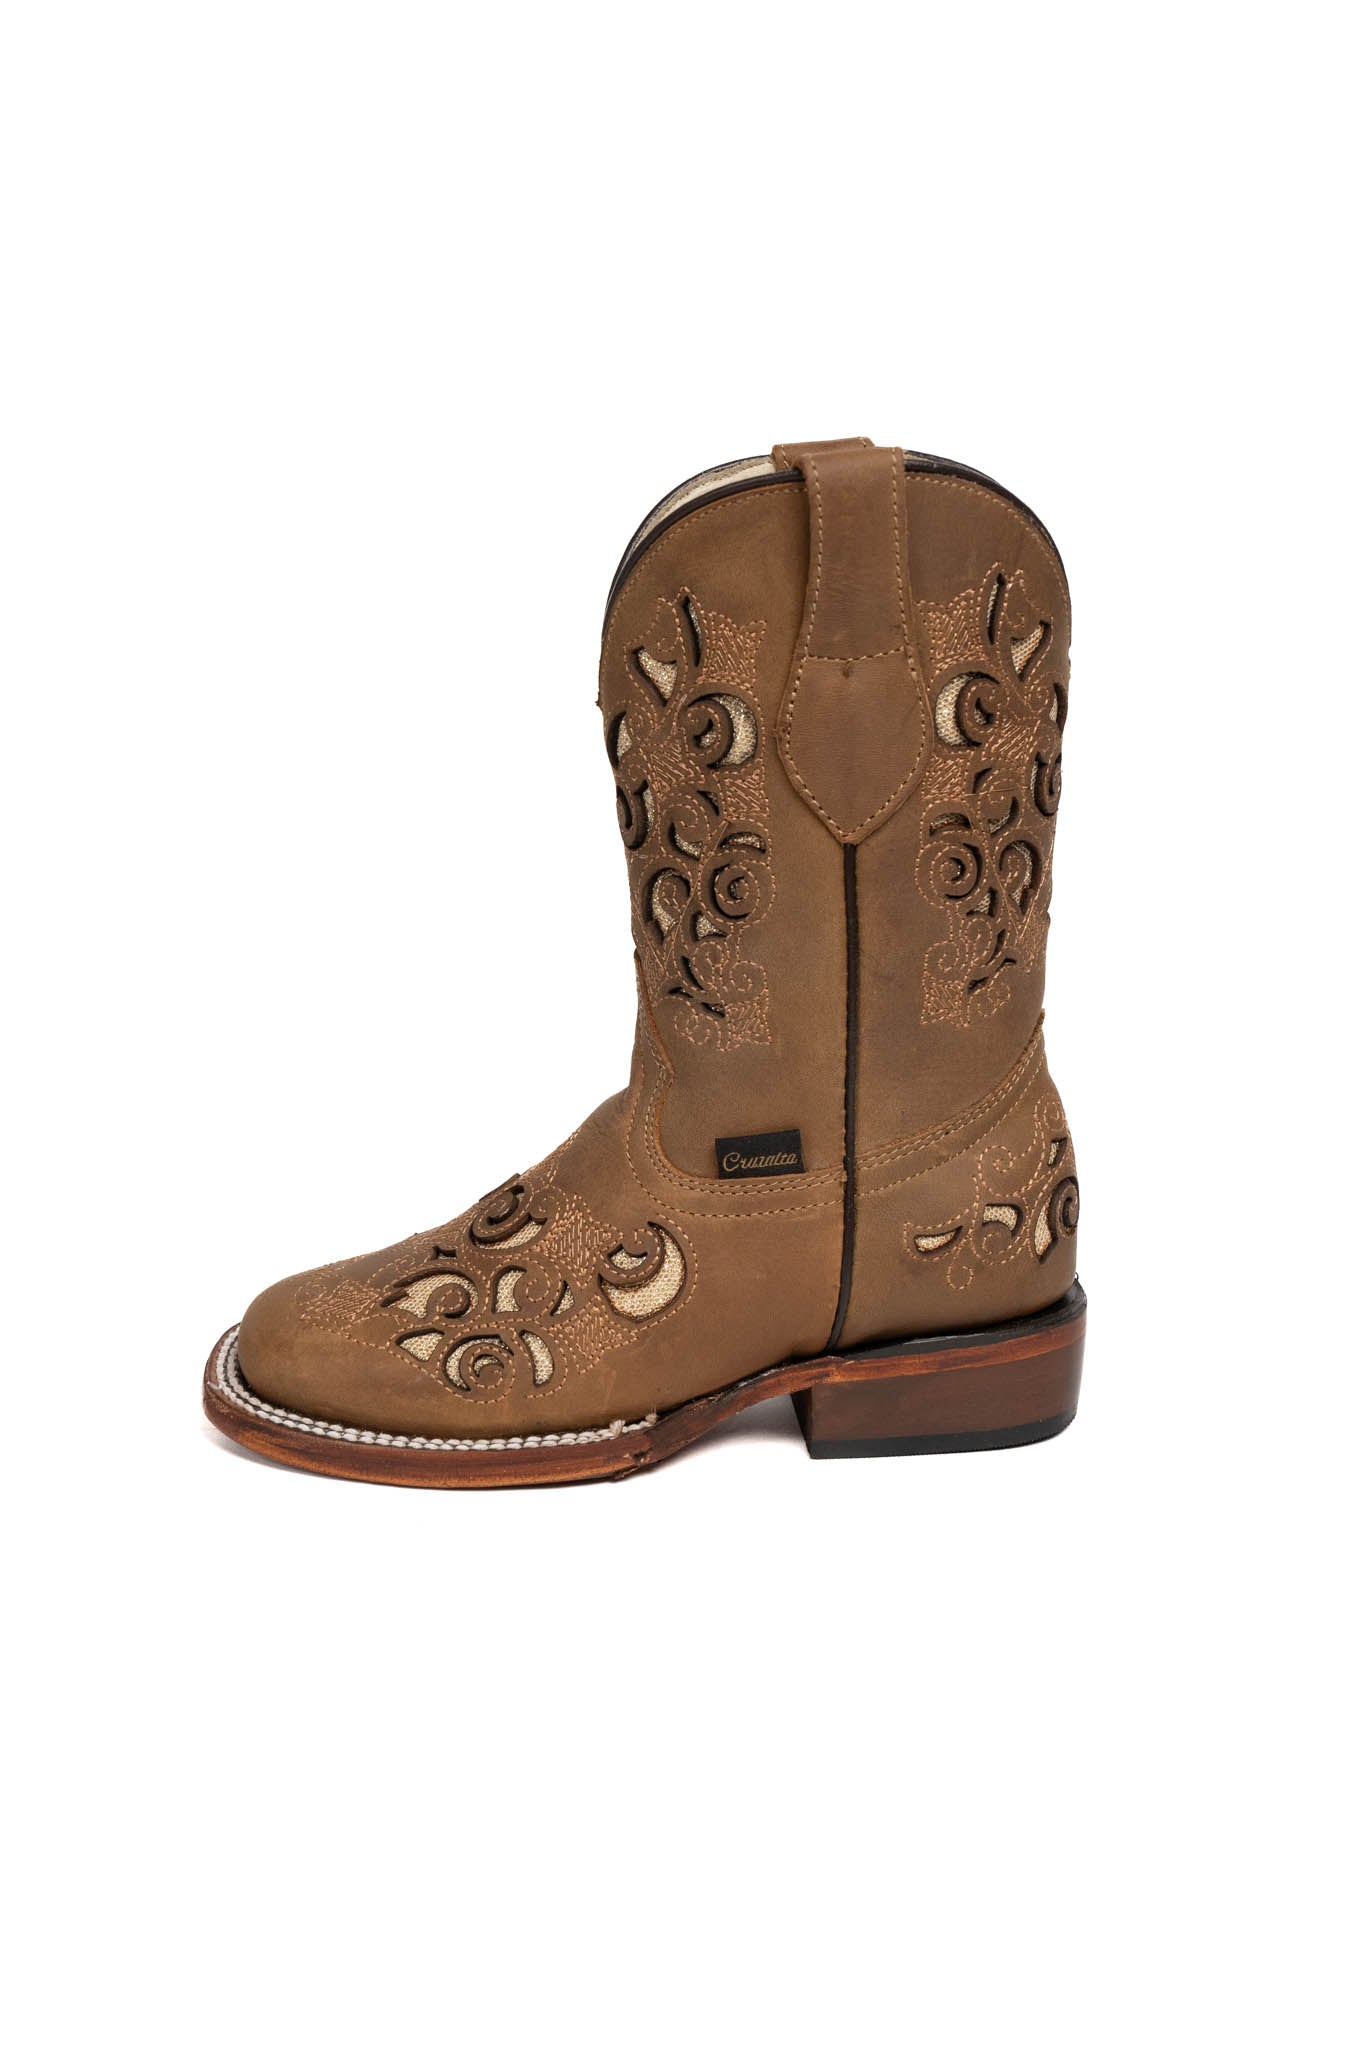 Little Campanas Tabaco Square Toe Cowgirl boot